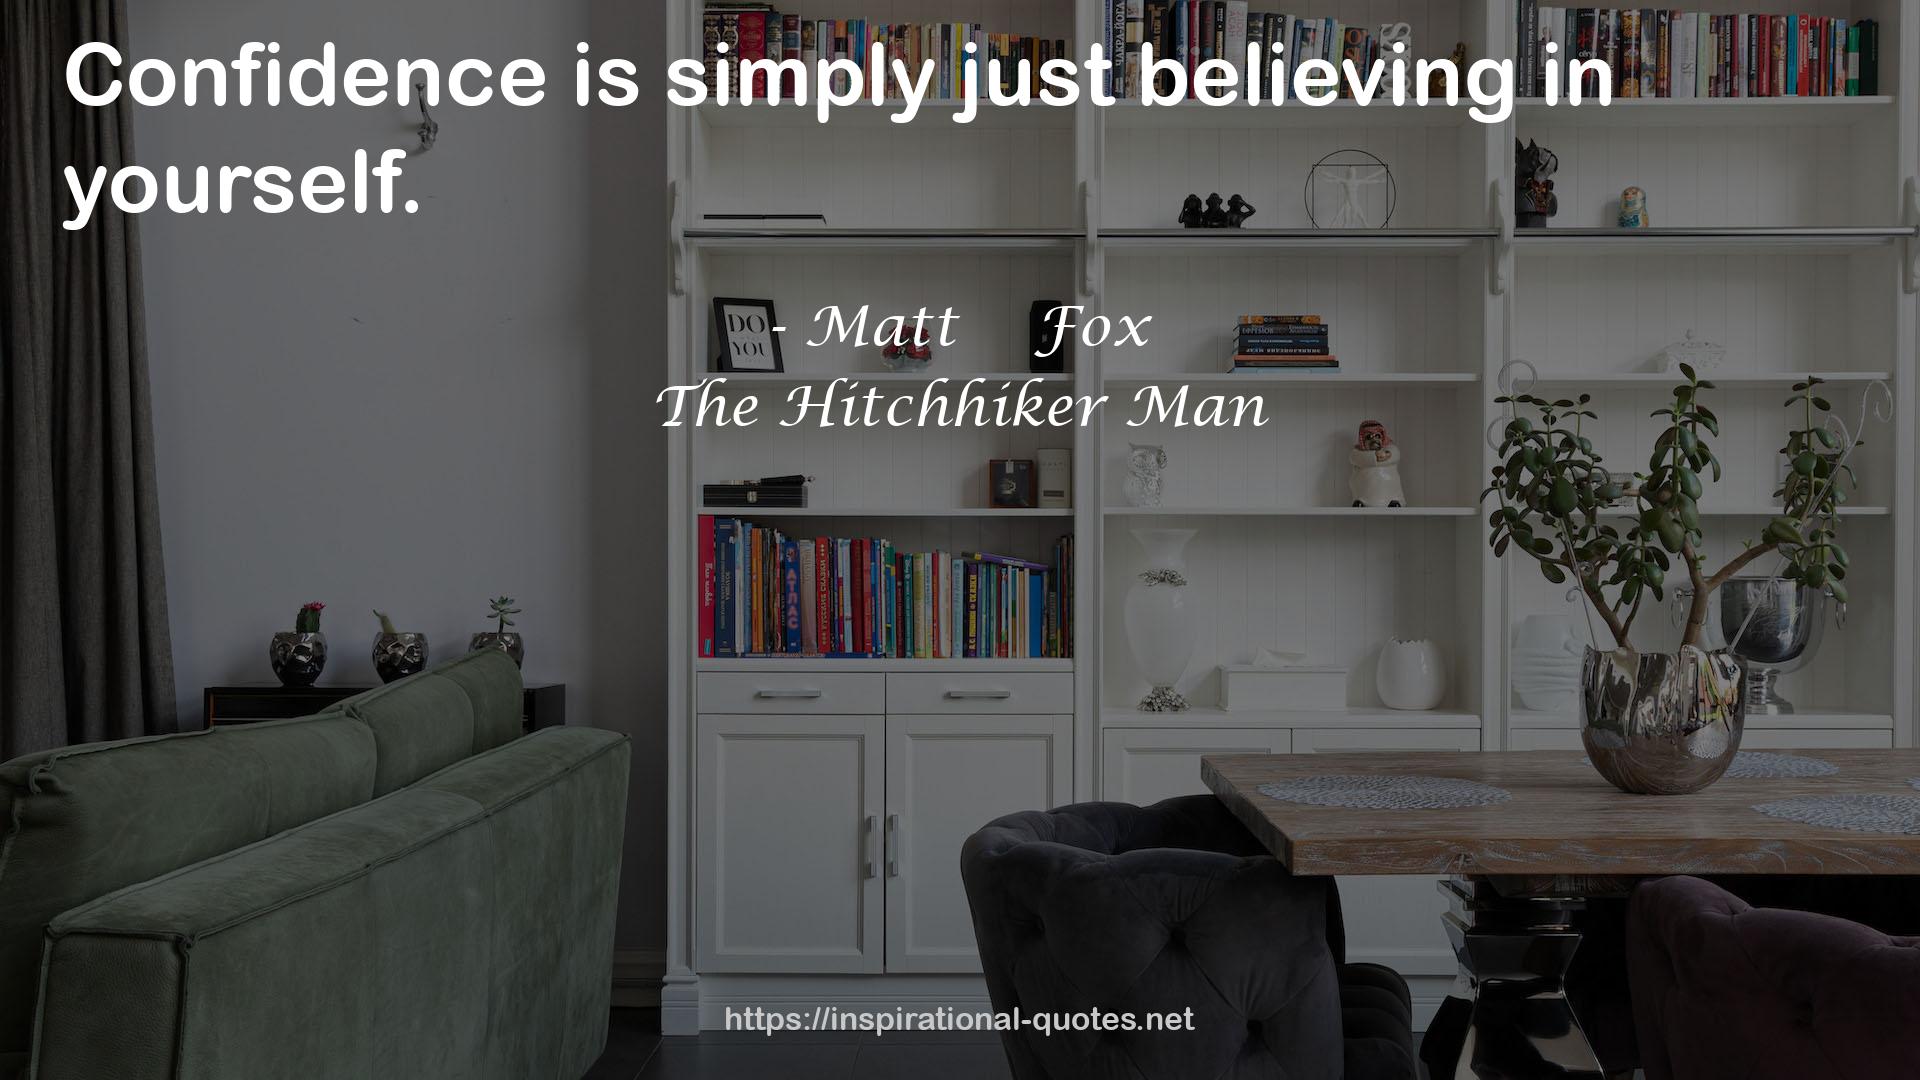 The Hitchhiker Man QUOTES